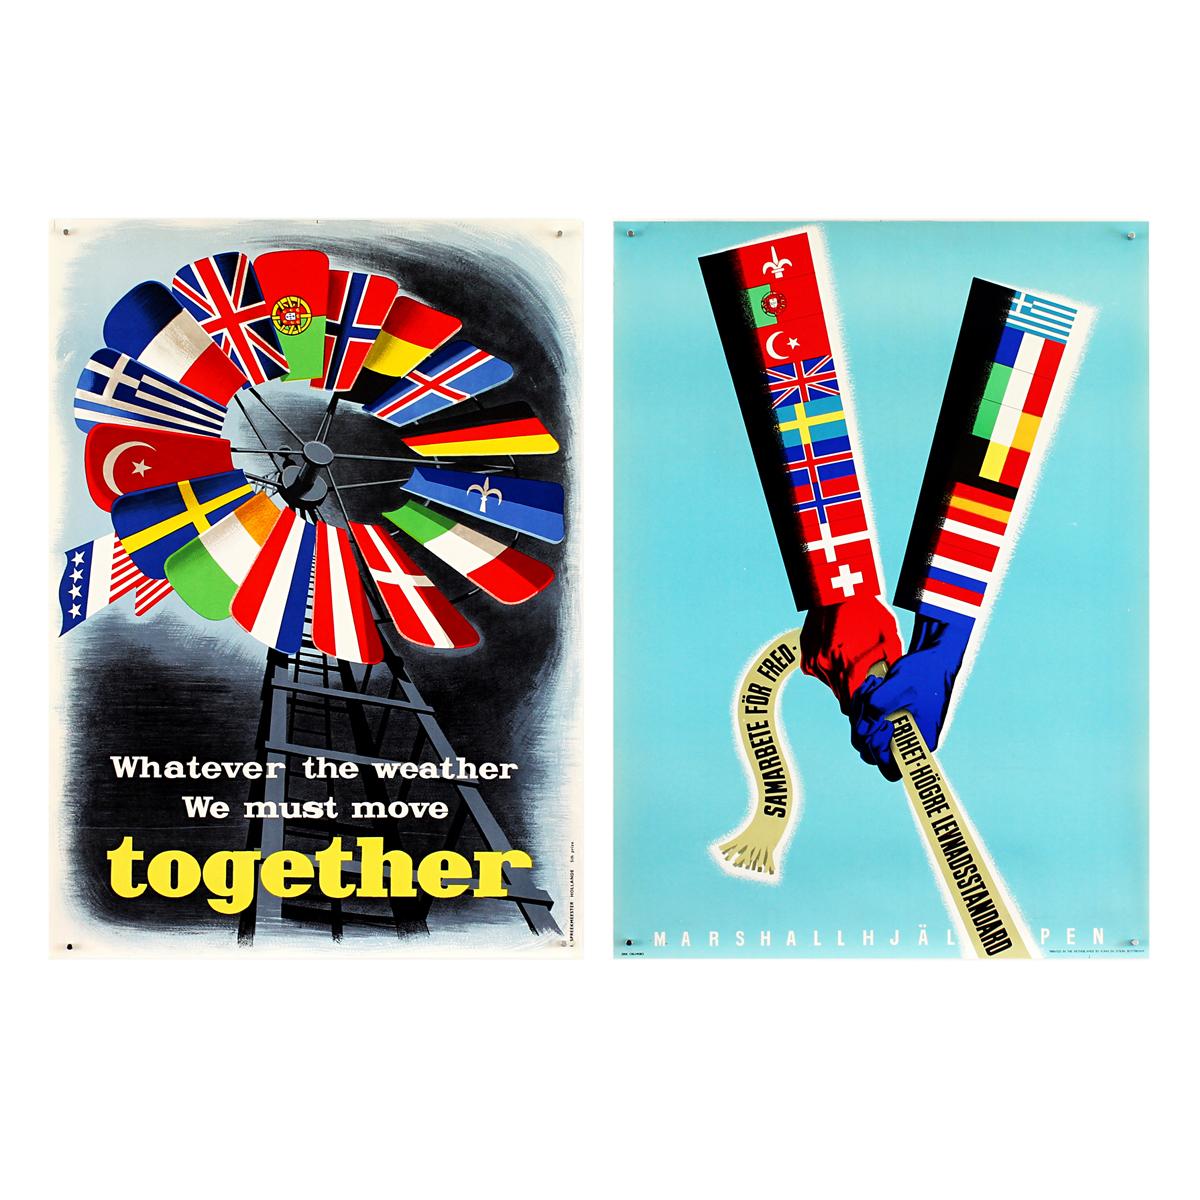 Mid-20th Century 25 Original Marshall Plan Posters, a Complete Collection of the Contest Winners